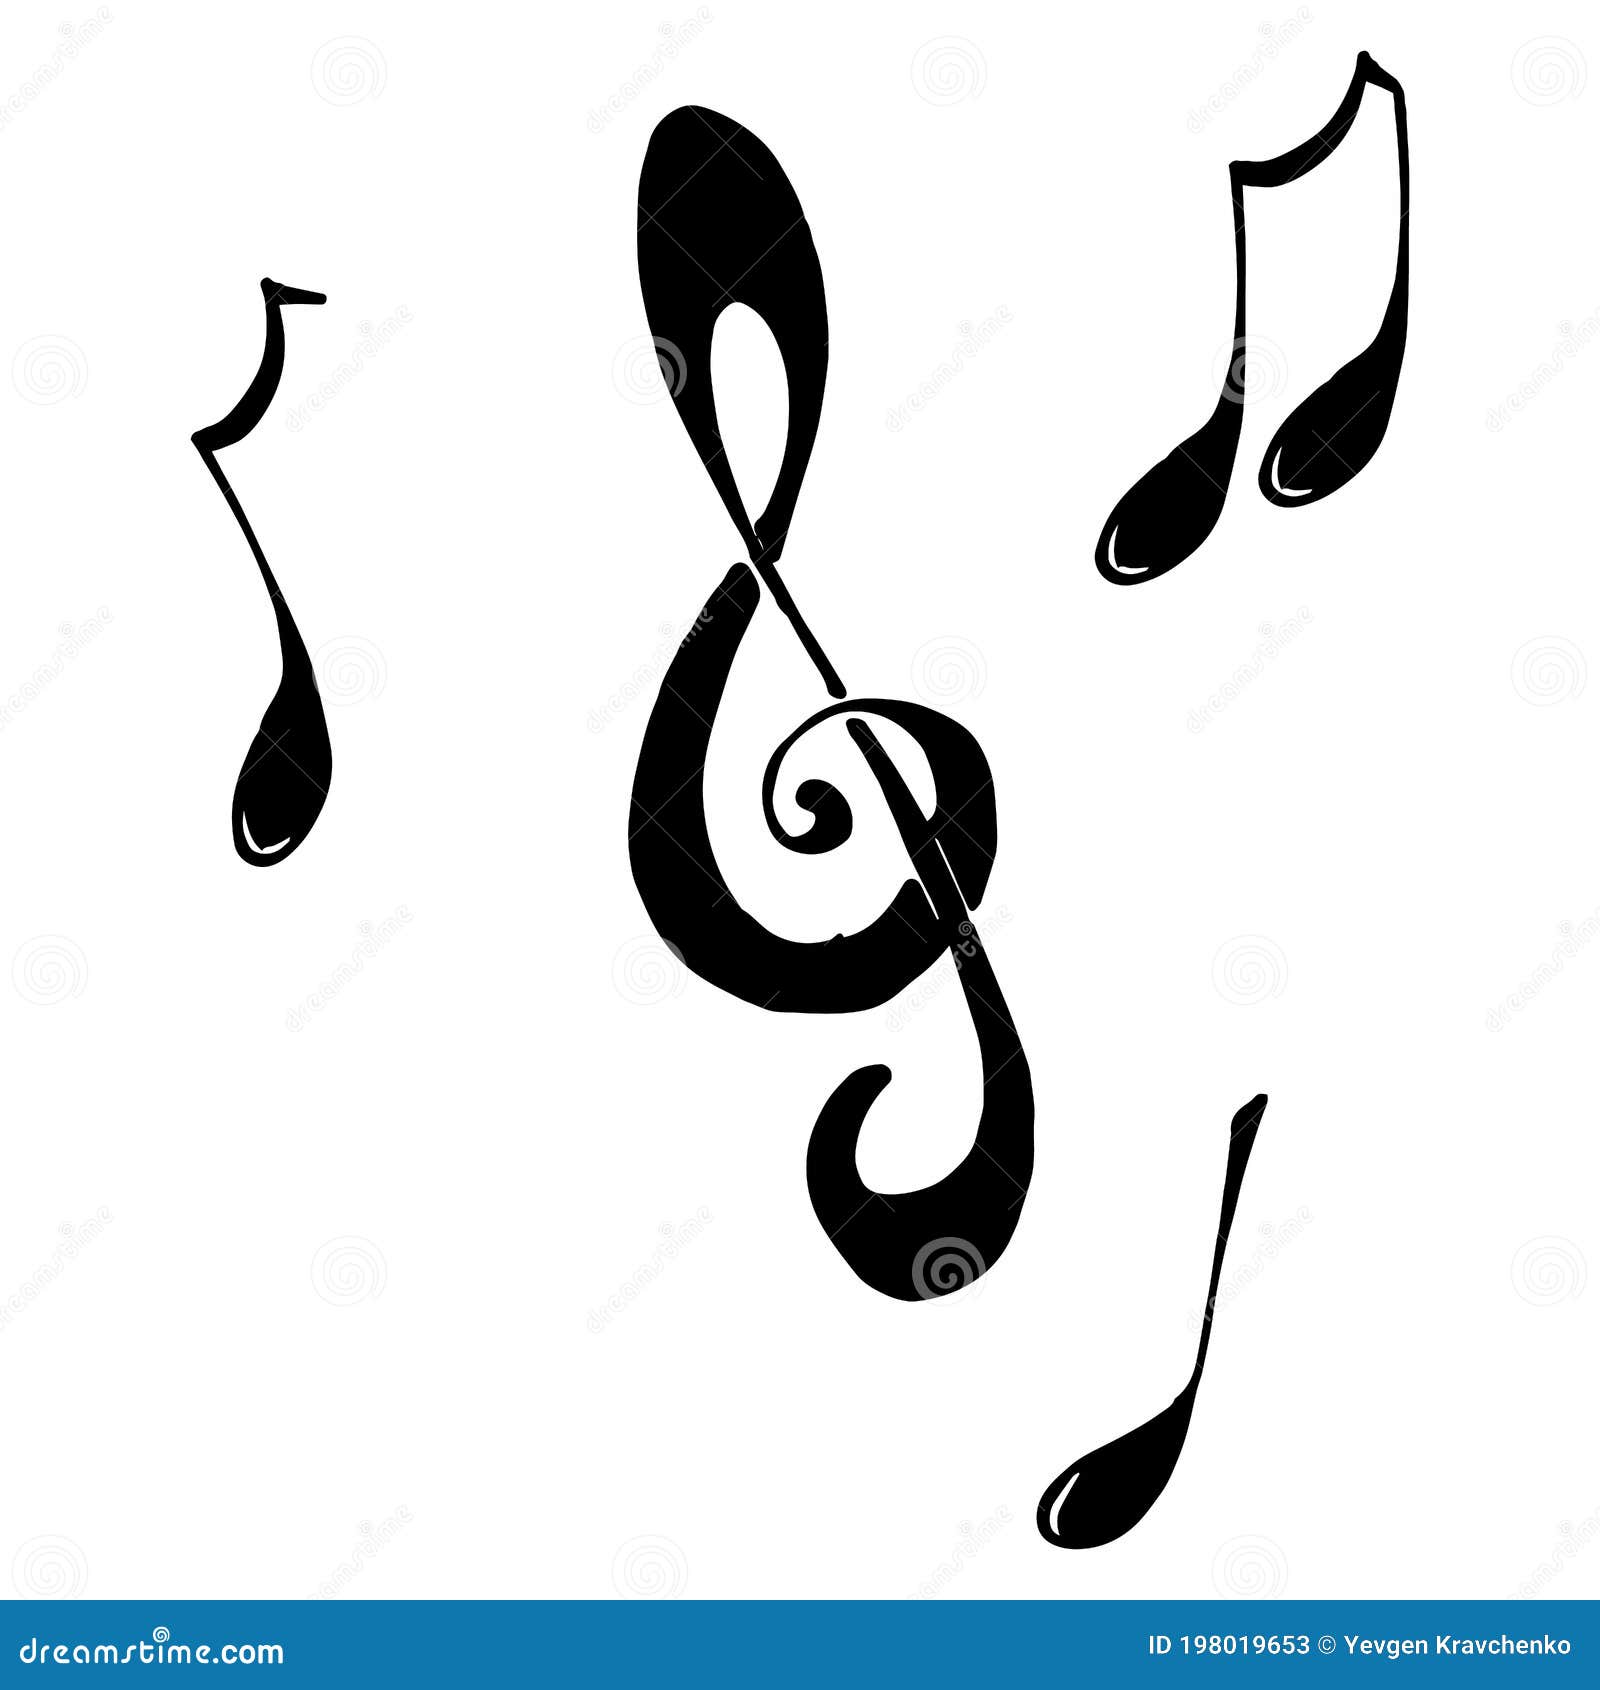 Music Notes Drawing HighRes Vector Graphic  Getty Images